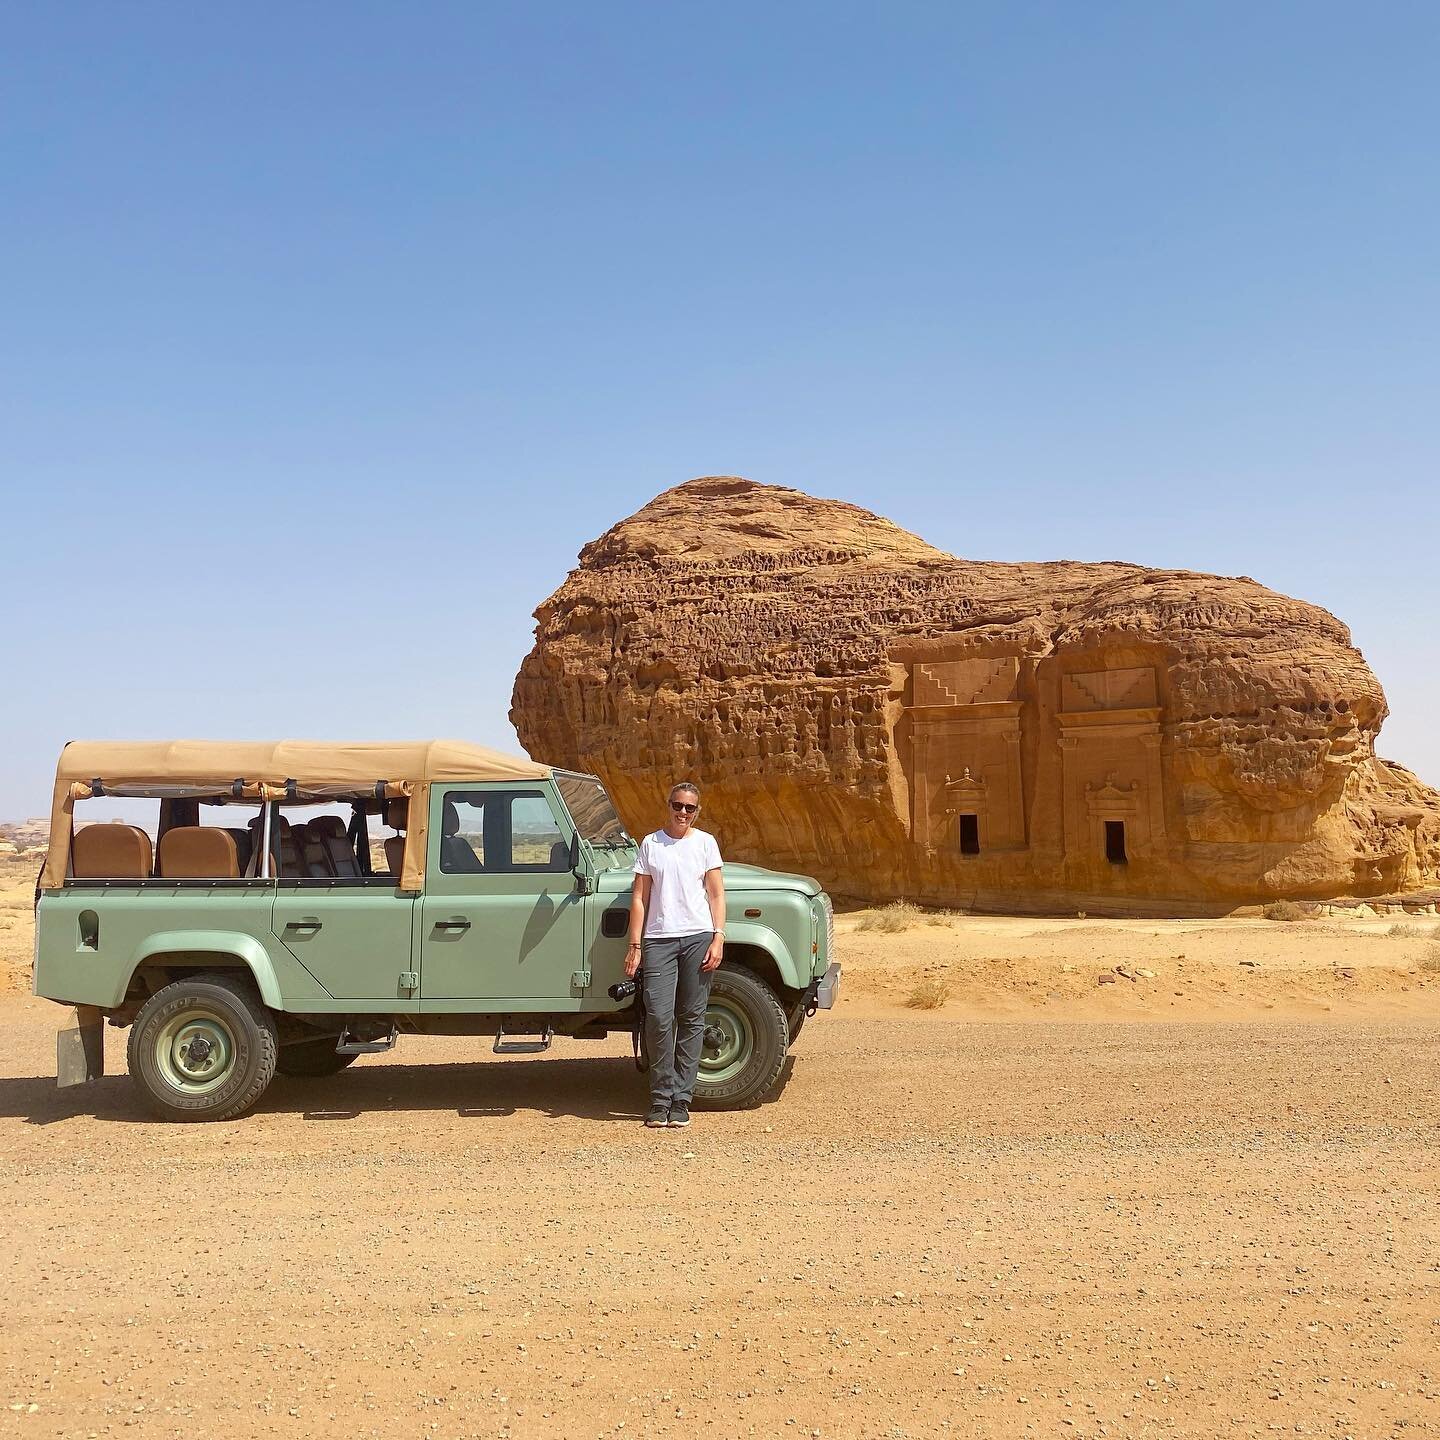 I was disappointed to miss AlUla on my first trip to Saudi in 2019. At the time there was so little tourism info available about this geological wonderland located on the Arabian Peninsula&rsquo;s historic incense route that I wasn&rsquo;t even sure 